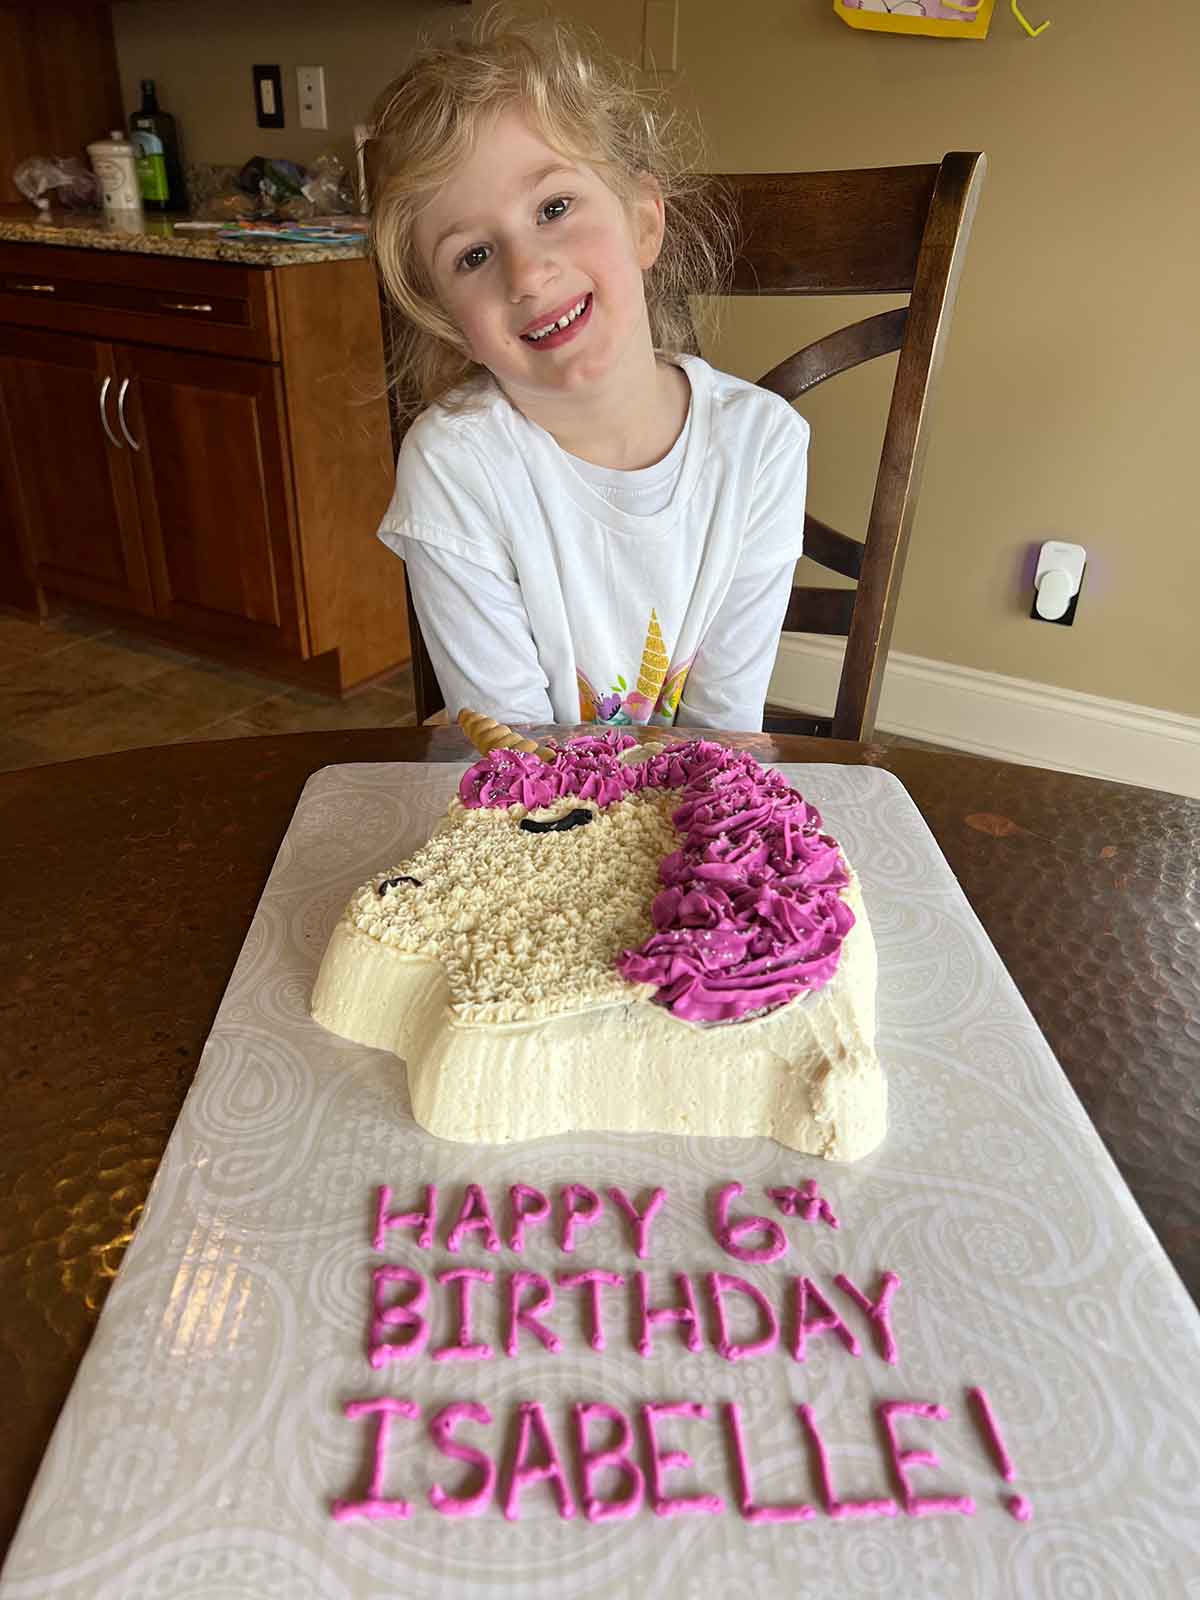 Little girl sitting in front of a unicorn cake with the words Happy 6th Birthday Isabelle.